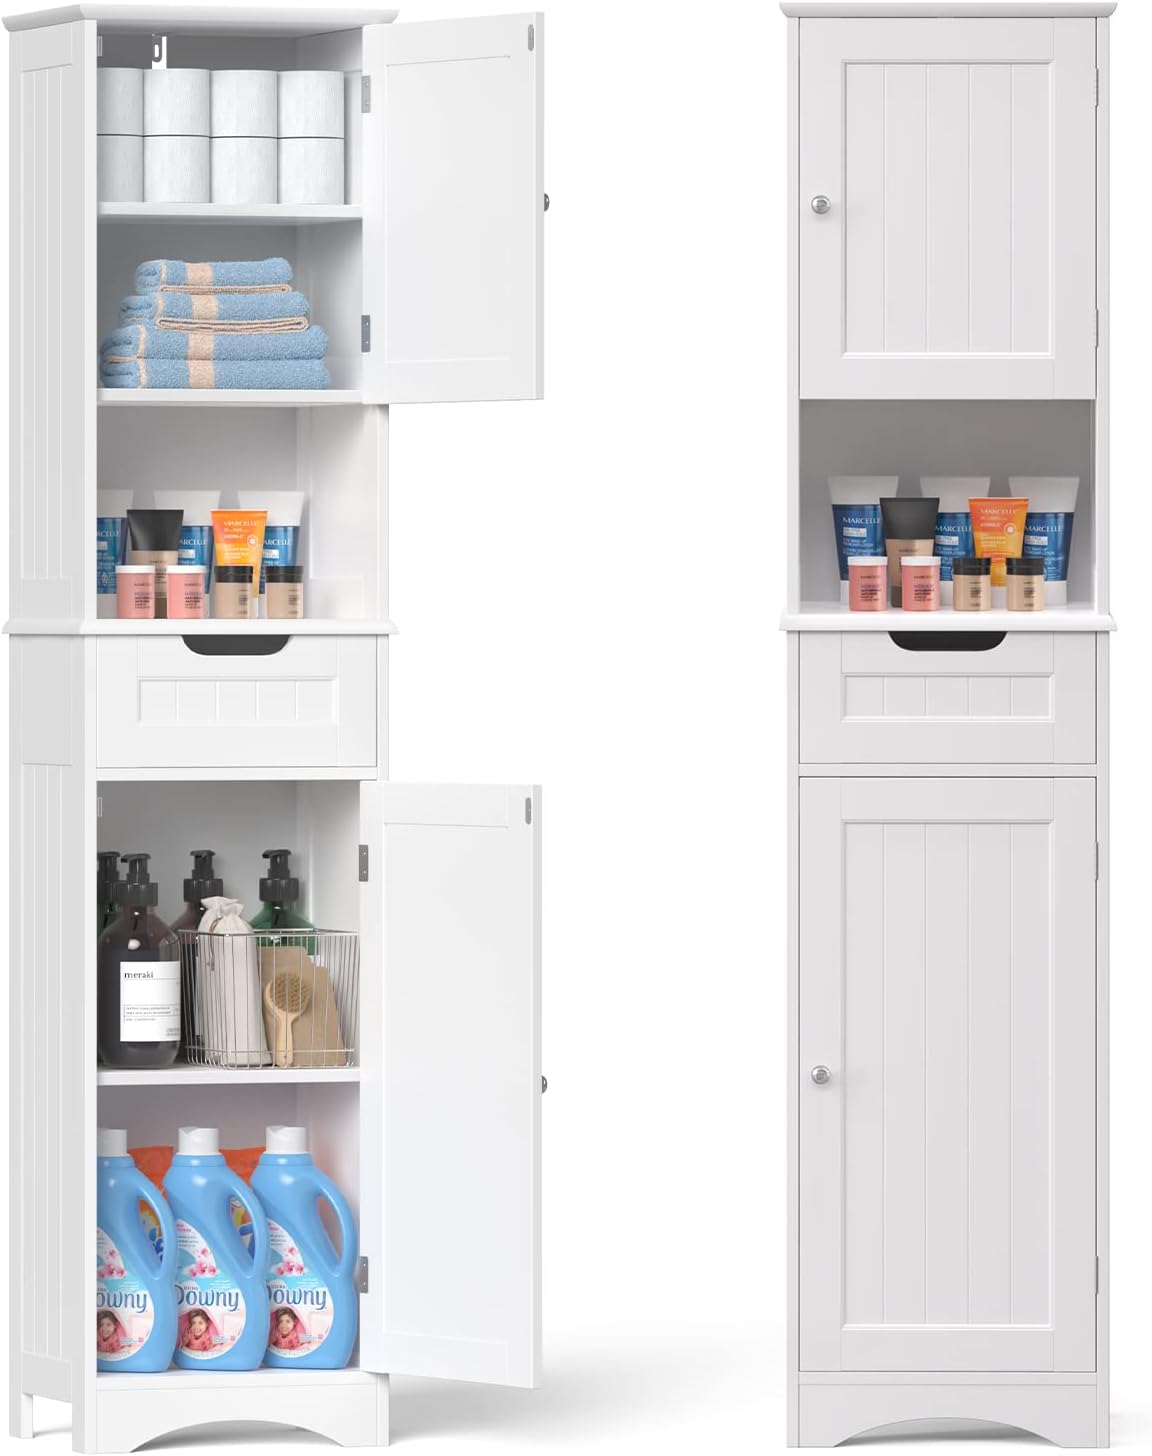 Gizoon 67 H Tall Bathroom Storage Cabinet w/ 2 Doors & 1 Drawer, Narrow Linen Tower Freestanding w/Adjustable Shelves for Home, Kitchen, Versatile, Anti-Tipping, White